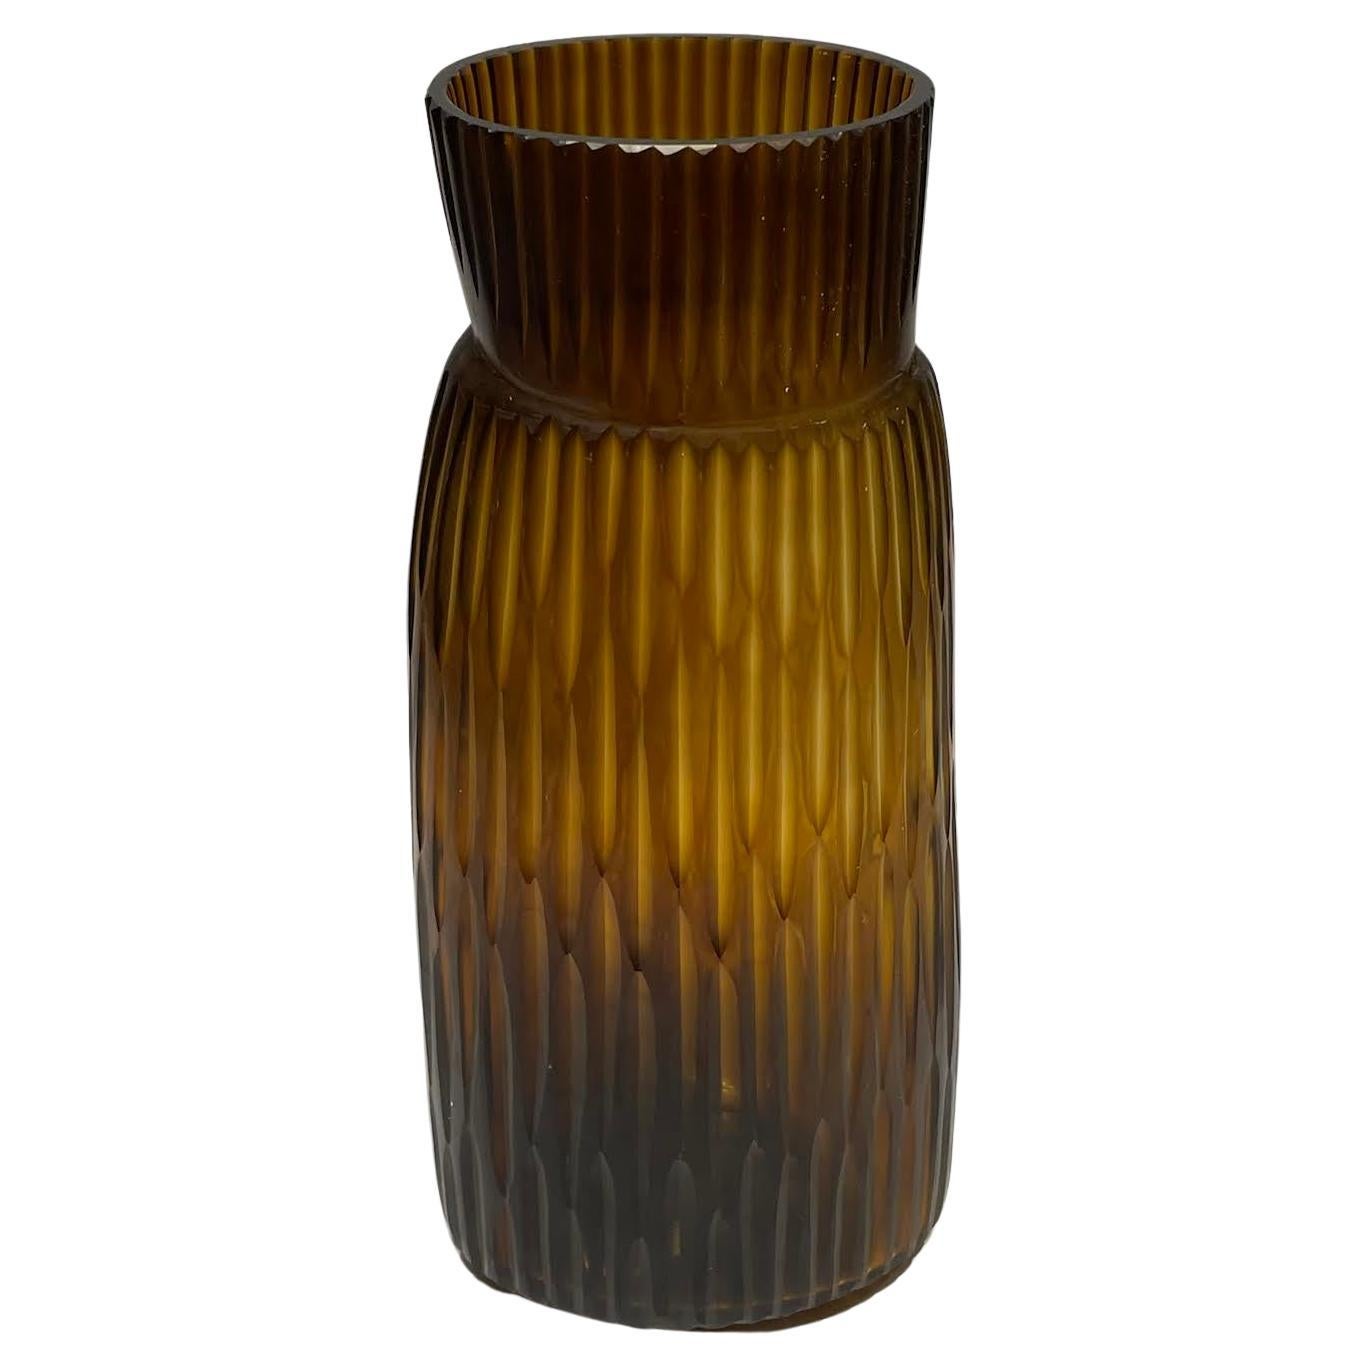 Contemporary Romanian tortoise colored thin vertical ribbed glass vase.
